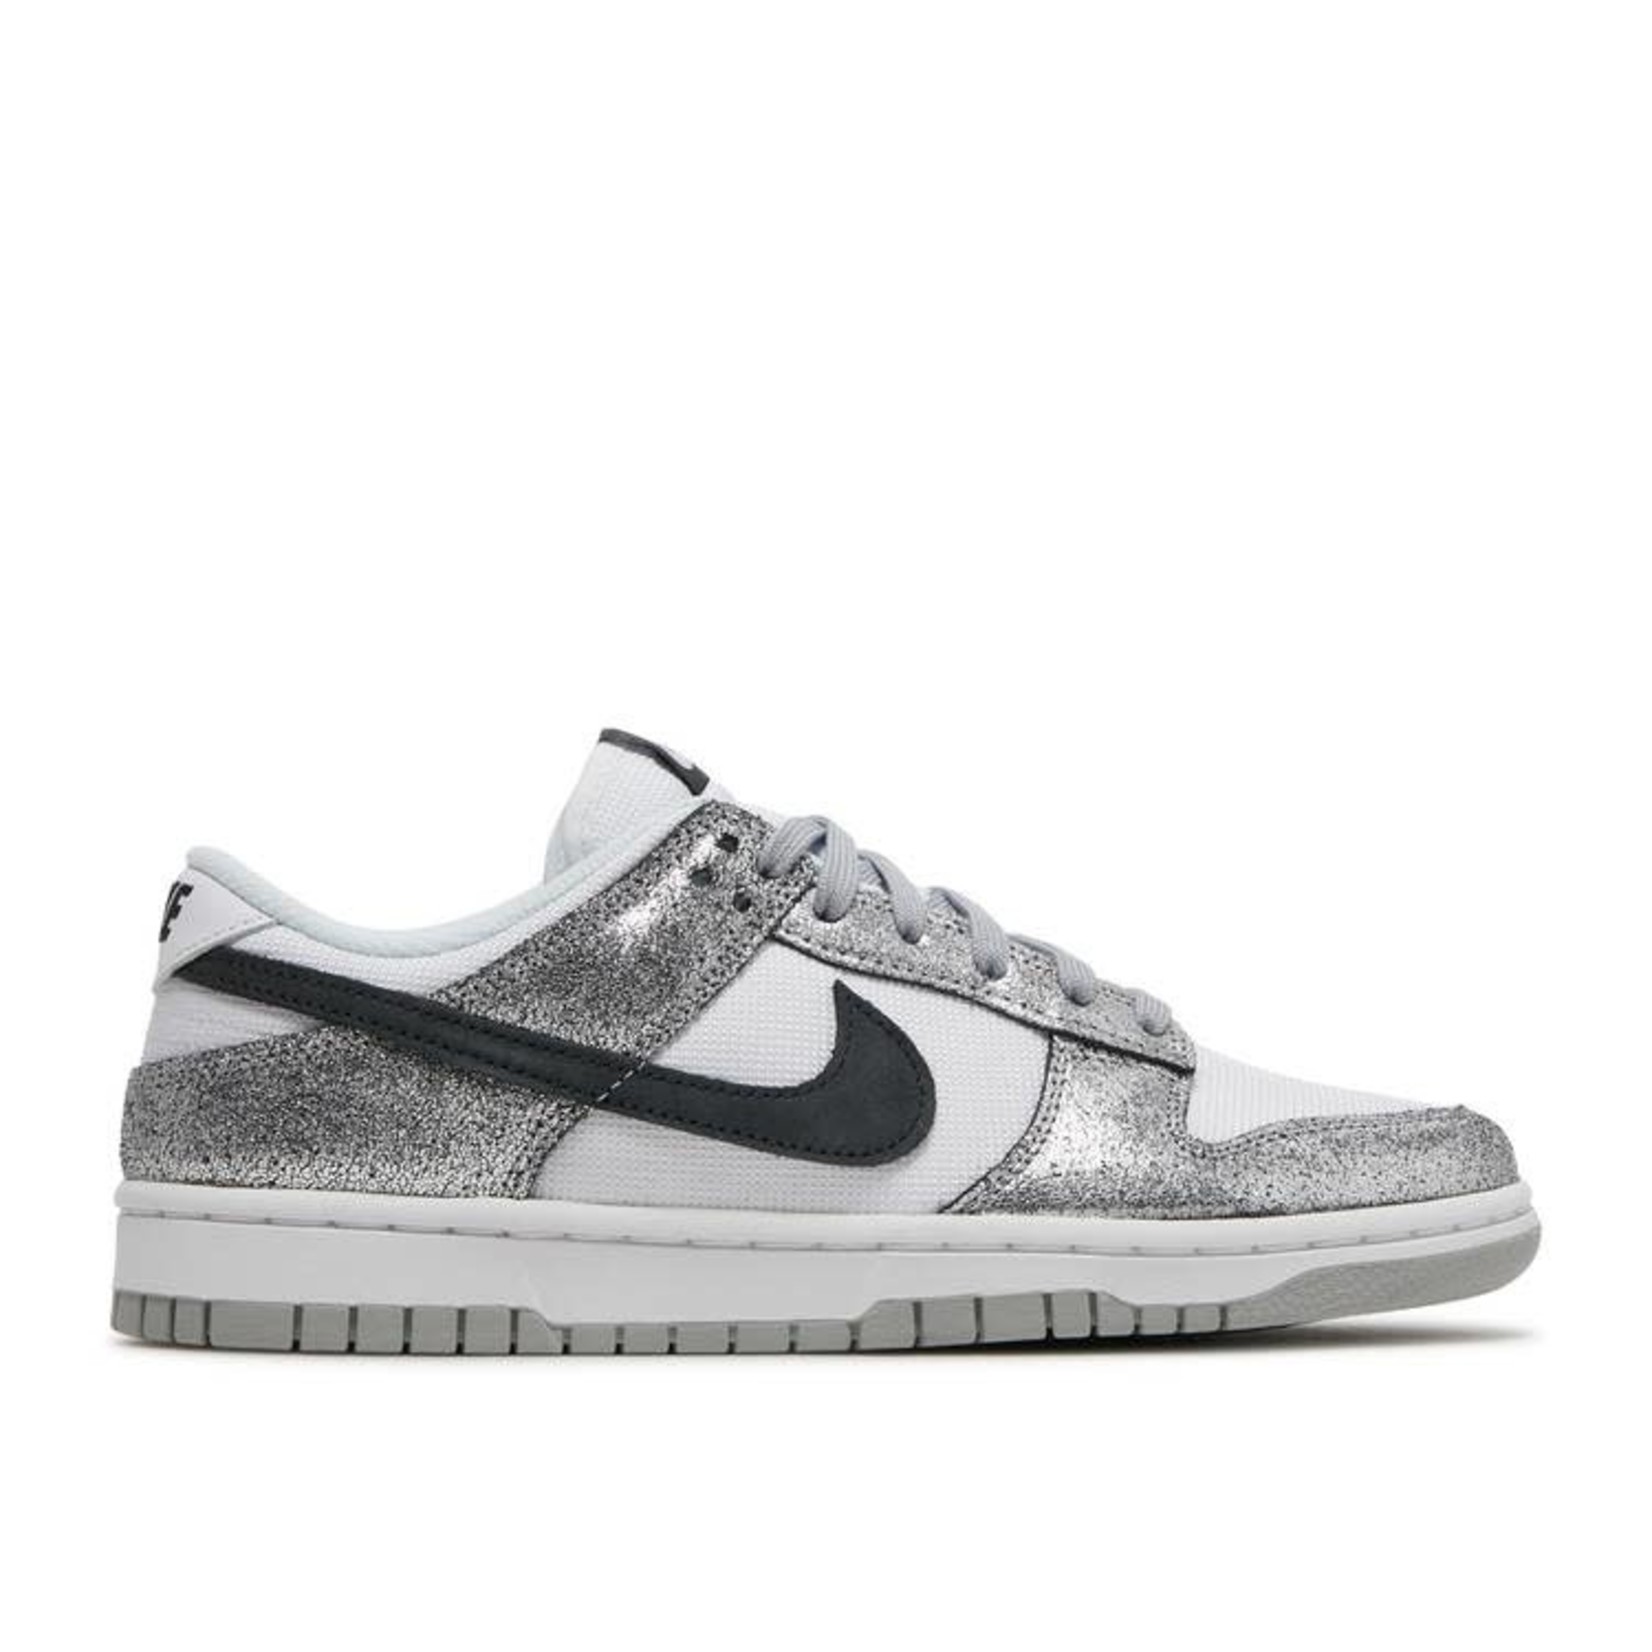 Nike Nike Dunk Low Golden Gals Metallic Silver (W) Size 7W, DS BRAND NEW